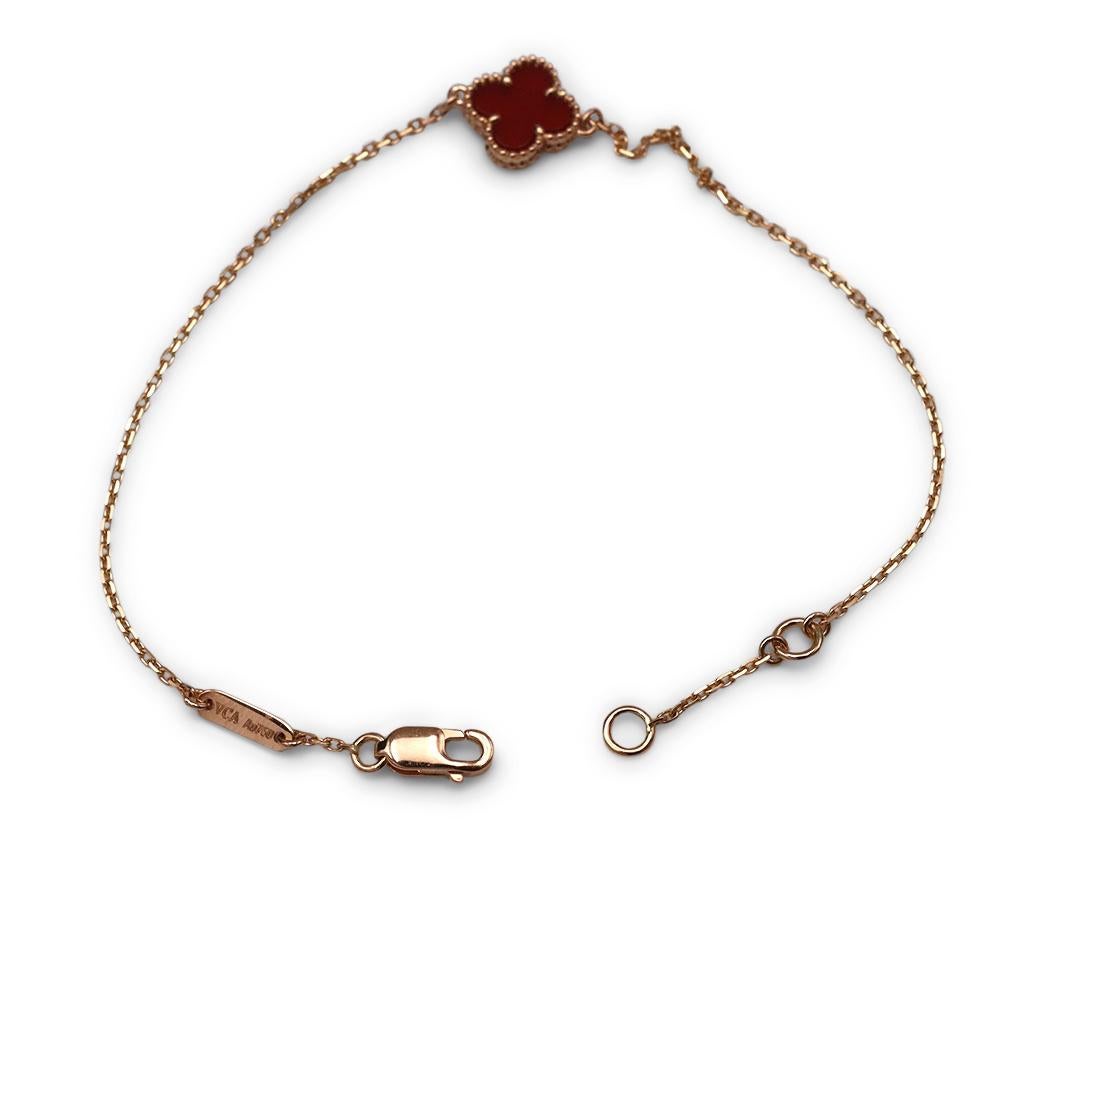 Authentic Van Cleef & Arpels 'Sweet Alhambra' bracelet crafted in 18 karat rose gold features a single carnelian clover motif. The delicate adjustable bracelet measures 7 inches in length. Signed VCA, AU750, with serial number. The bracelet is